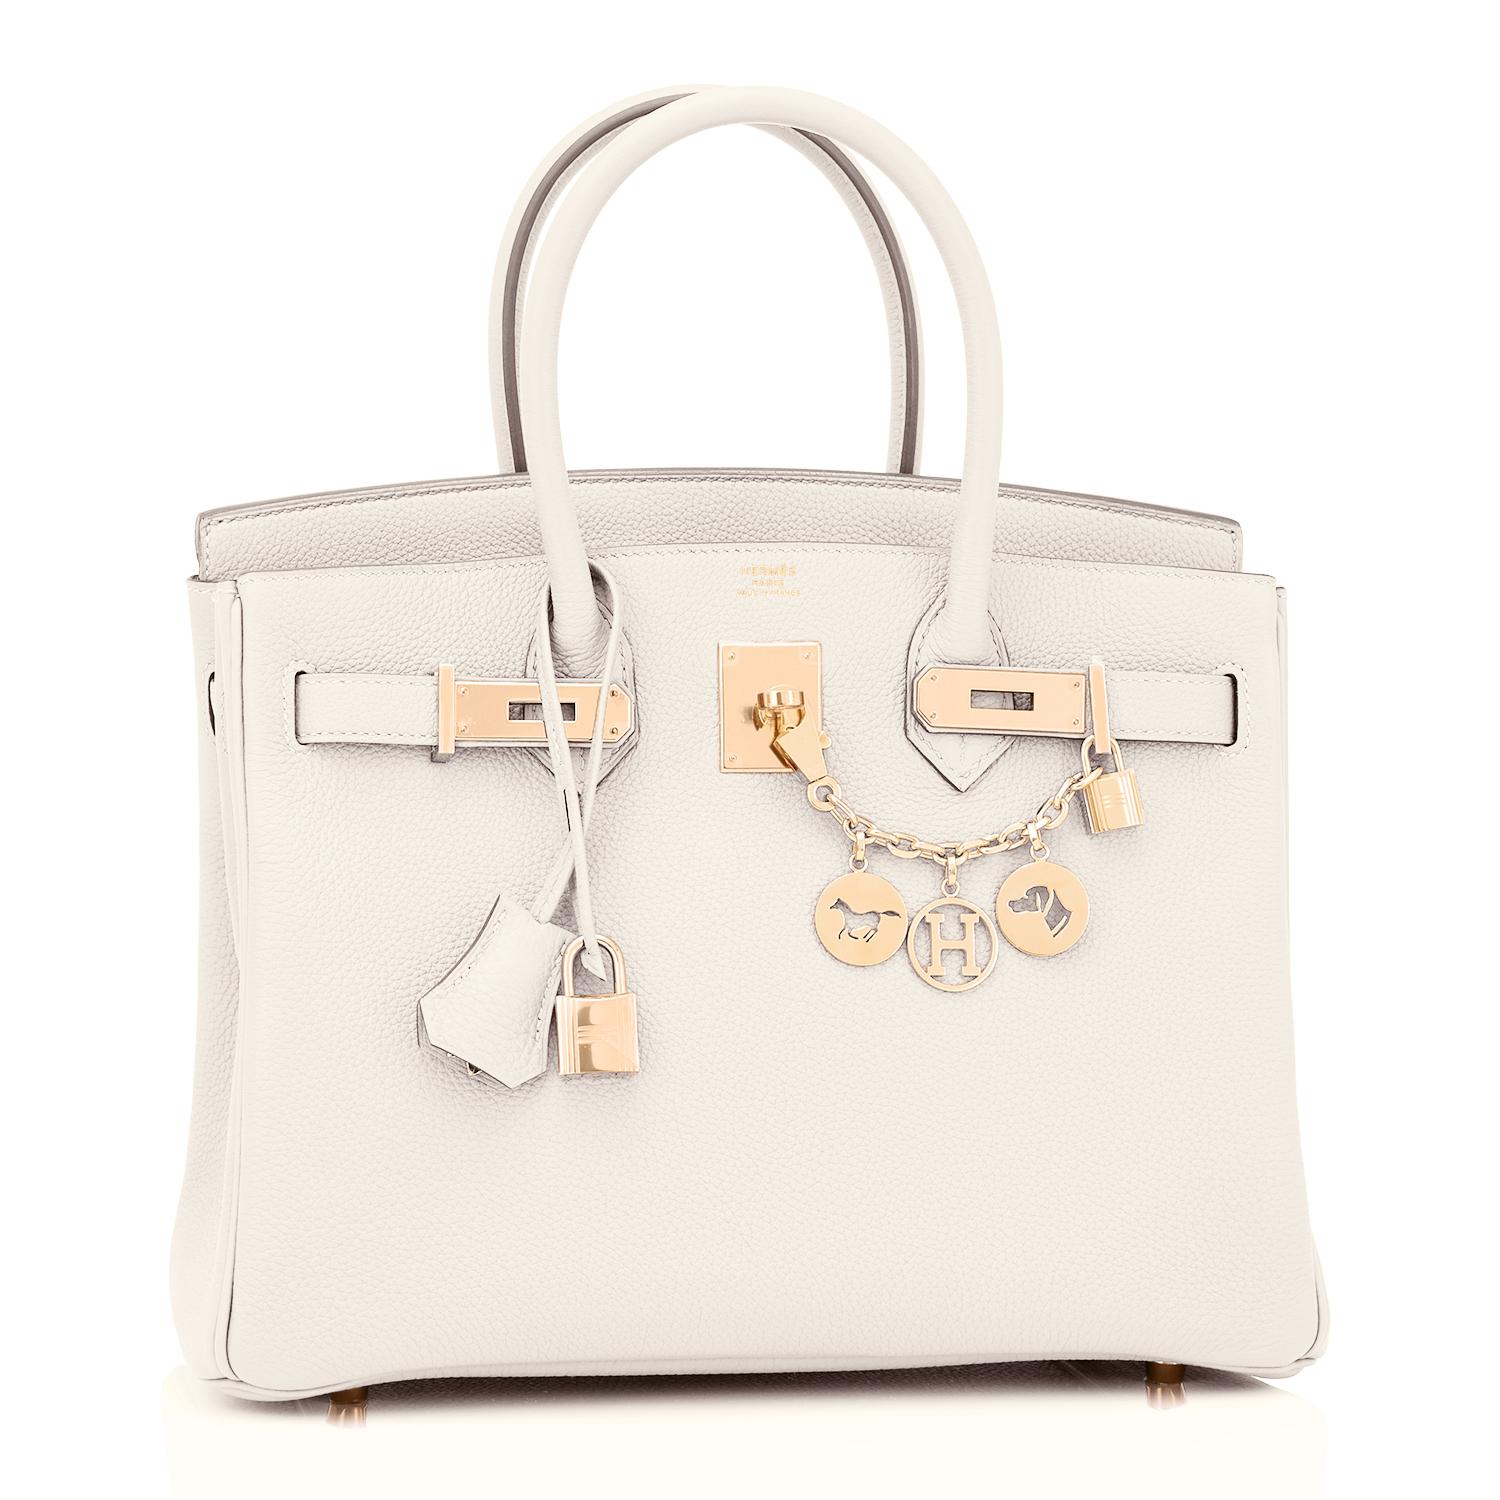 Hermes Craie 30cm Birkin Togo Rose Gold Hardware Chalk Off White NEW
Just purchased from Hermes store; bag bears new interior 2021 Z Stamp.
Brand New in Box. Store fresh. Pristine Condition (plastic on hardware.)
Perfect gift! Comes in full set with